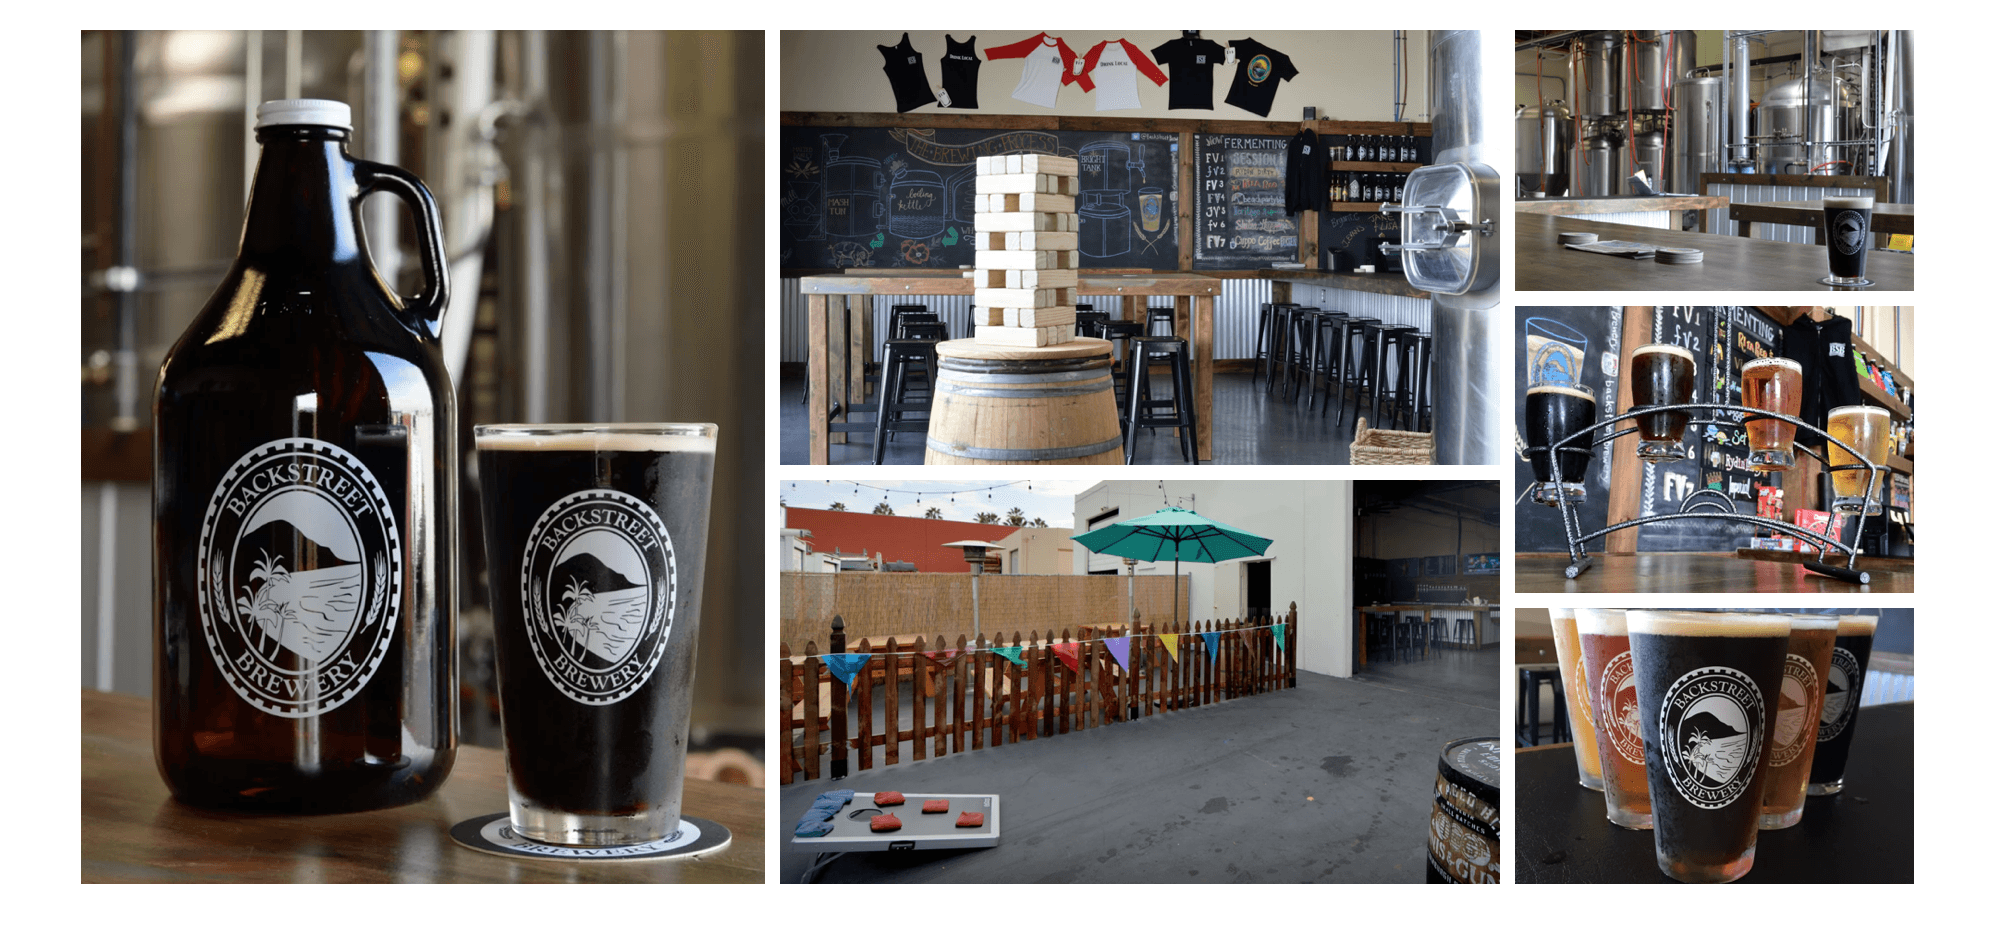 Collage of Backstreet Brewery Images